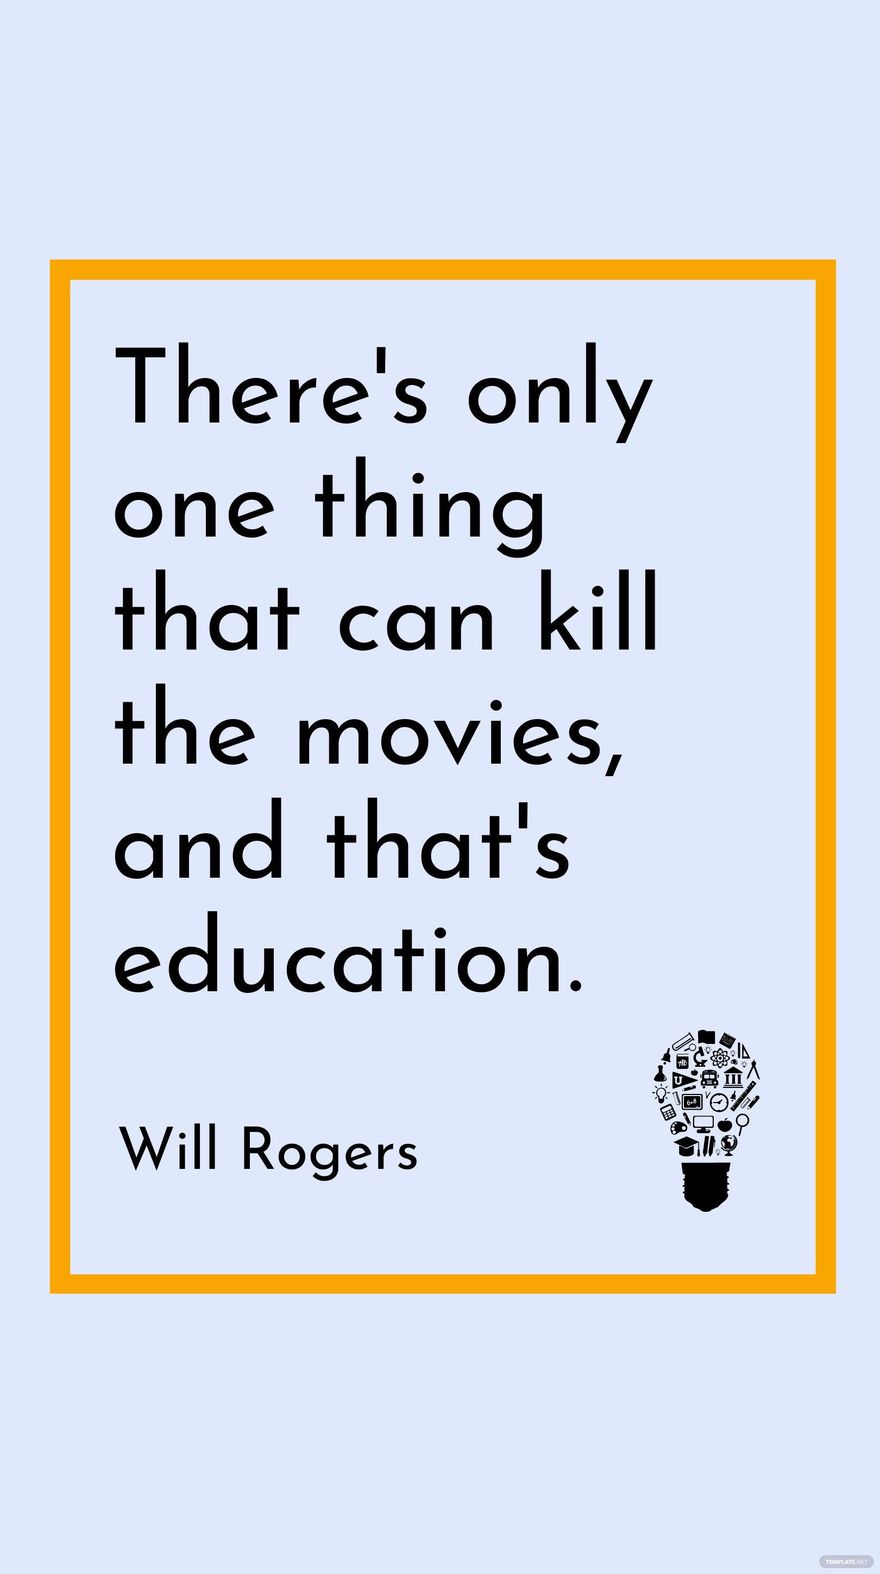 Will Rogers - There's only one thing that can kill the movies, and that's education.